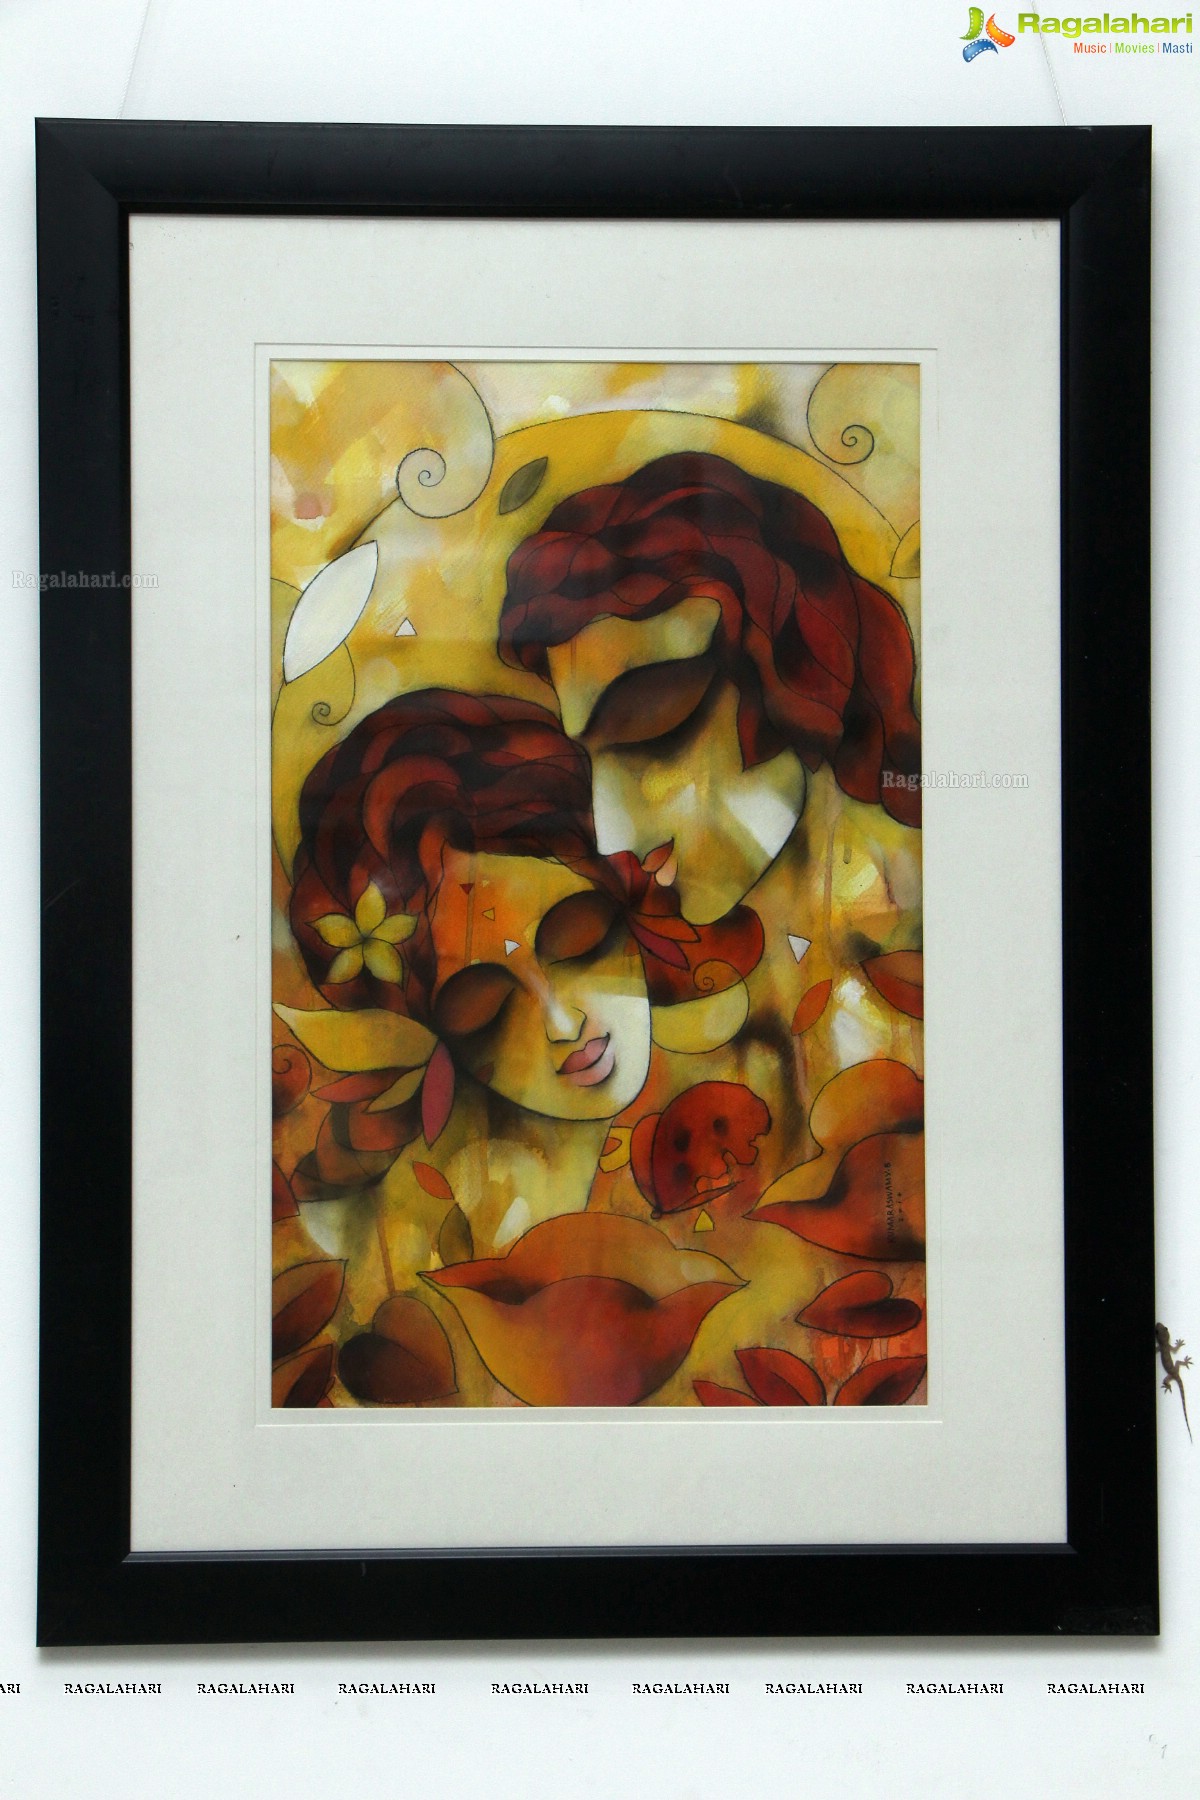 Collection of Original Contemporary Indian Art for Sale at Gallery Space, Hyderabad